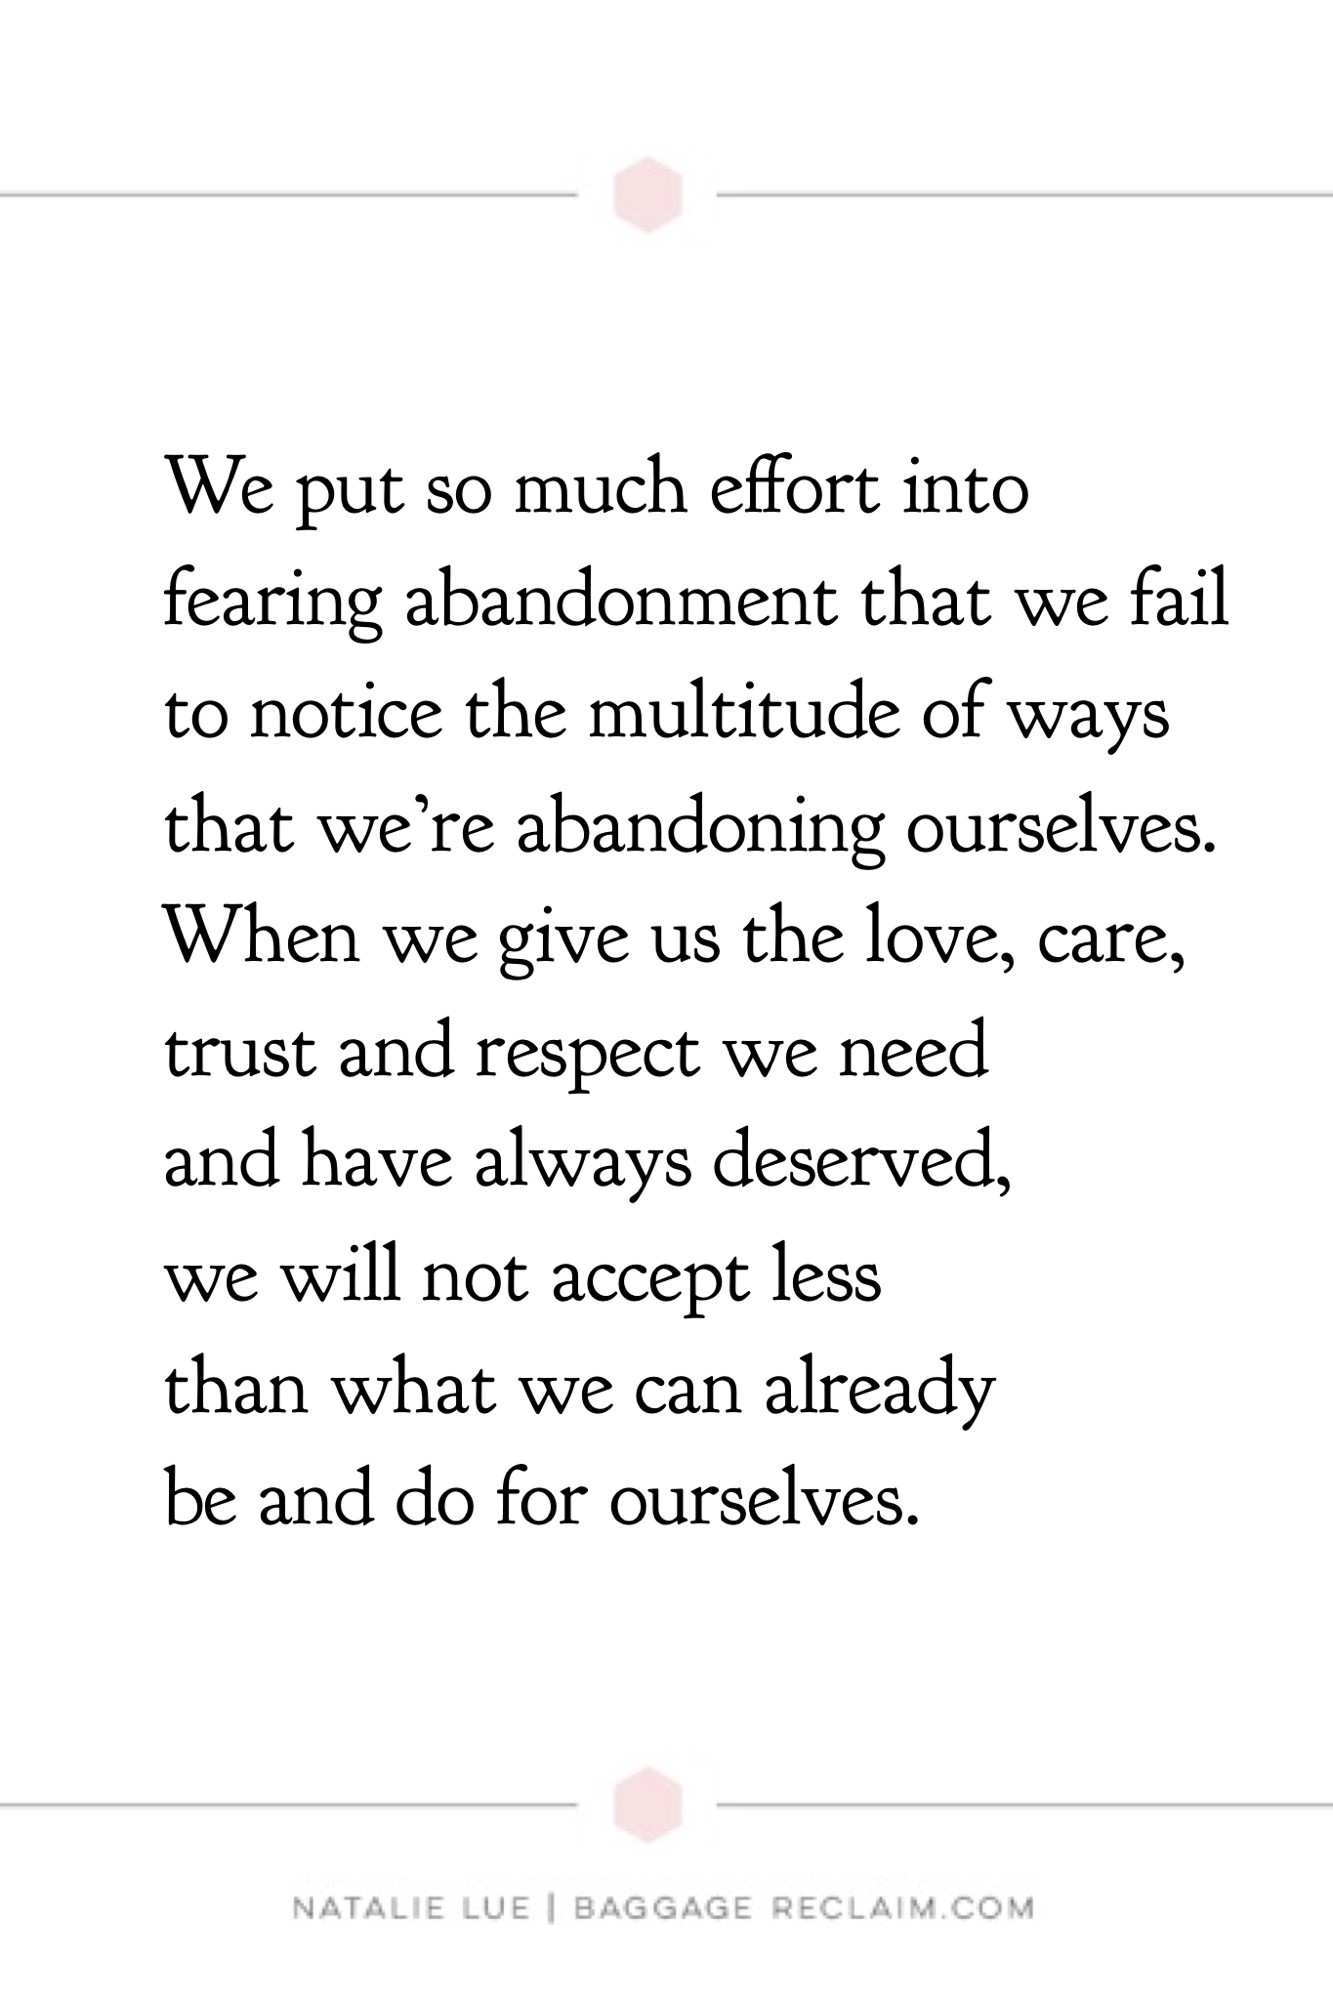 We put so much effort into fearing abandonment that we fail to notice the multitude of ways that we're abandoning ourselves. When we give us the love, care, trust and respect we need and have always deserved, we will not accept less than what we can already be and do for ourselves.